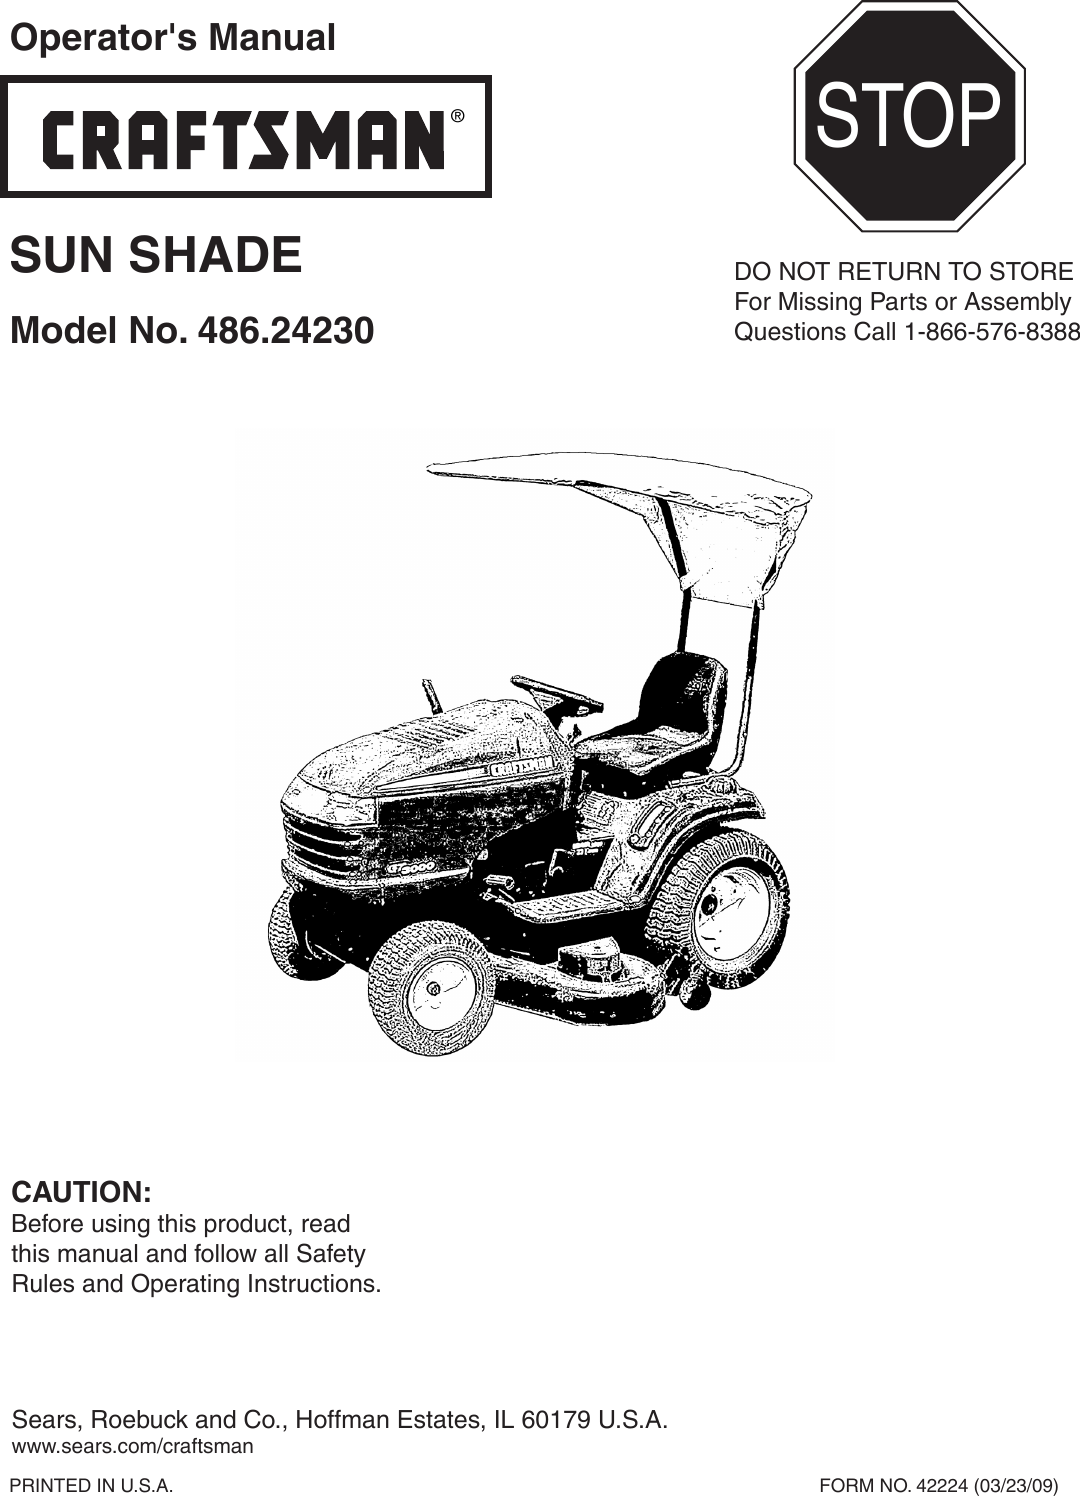 Page 1 of 8 - Craftsman Craftsman-Deluxe-Sun-Shade-For-Tractors-Owners-Manual-  Craftsman-deluxe-sun-shade-for-tractors-owners-manual